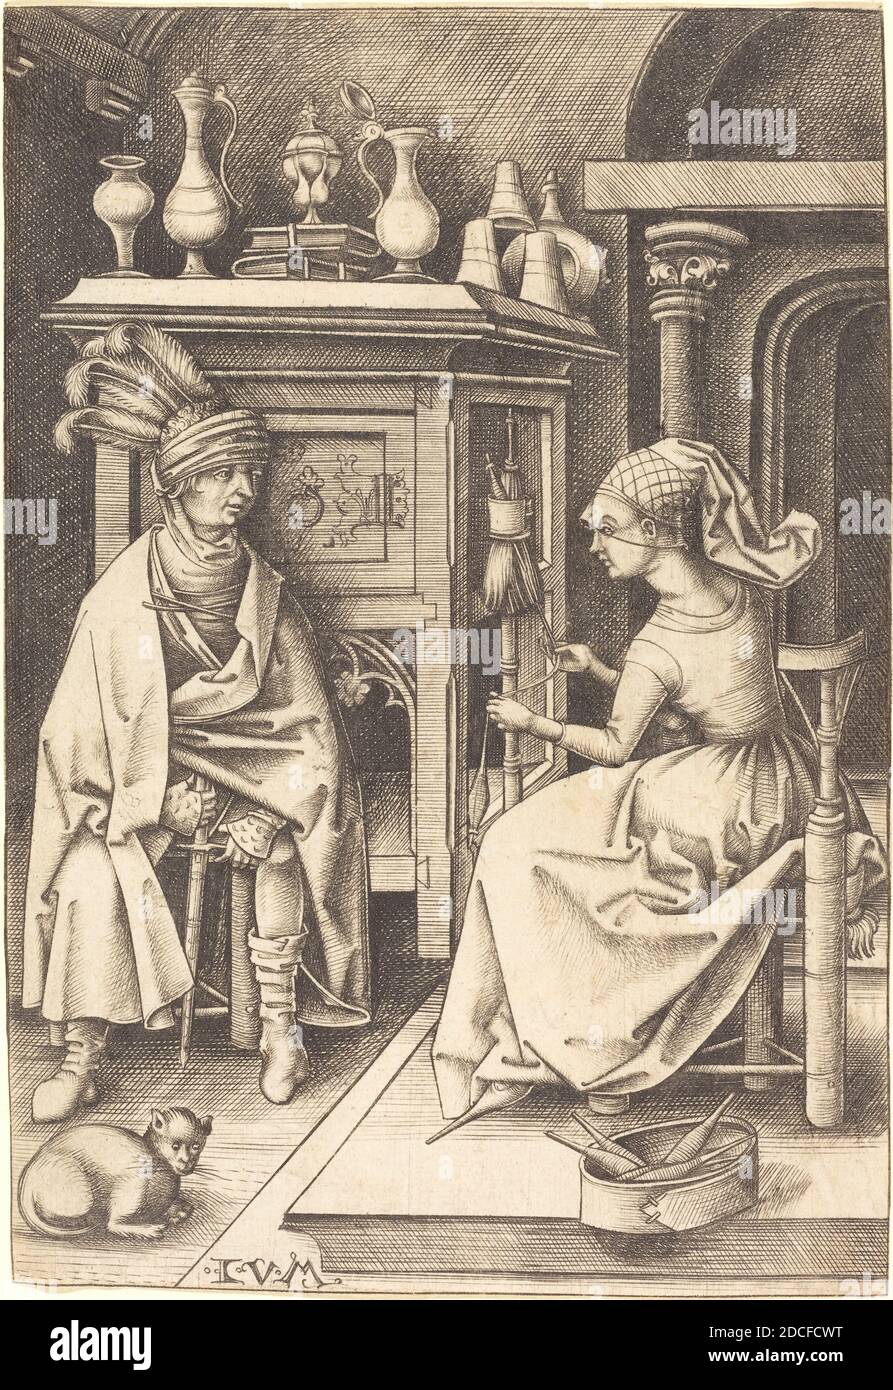 Israhel van Meckenem, (artist), German, c. 1445 - 1503, The Visit to the Spinner, Scenes of Daily Life, (series), c. 1495/1503, engraving, sheet (trimmed to plate mark): 16.2 x 11.1 cm (6 3/8 x 4 3/8 in Stock Photo